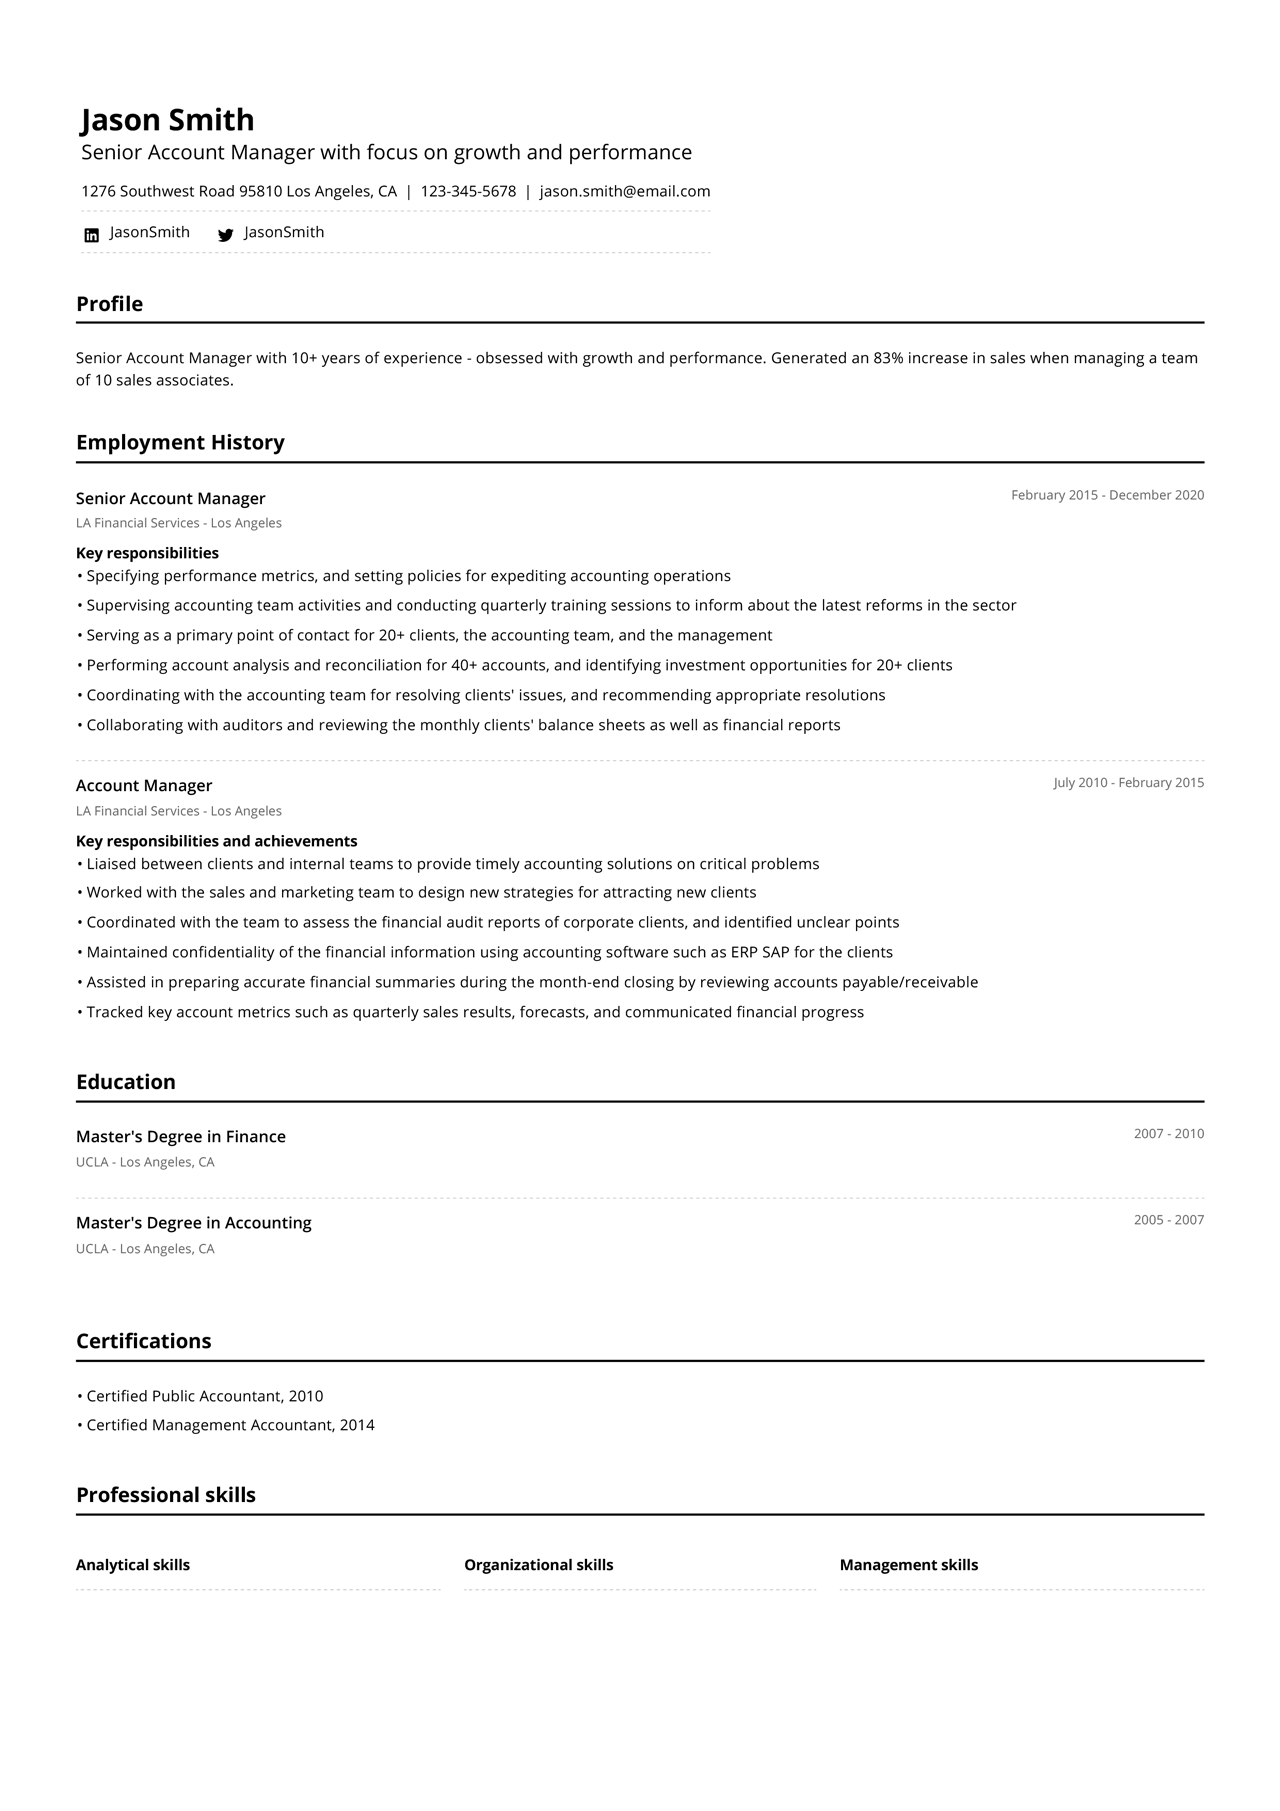 Image of a reverse-chronological resume example from a senior account manager with more than 10 years experience